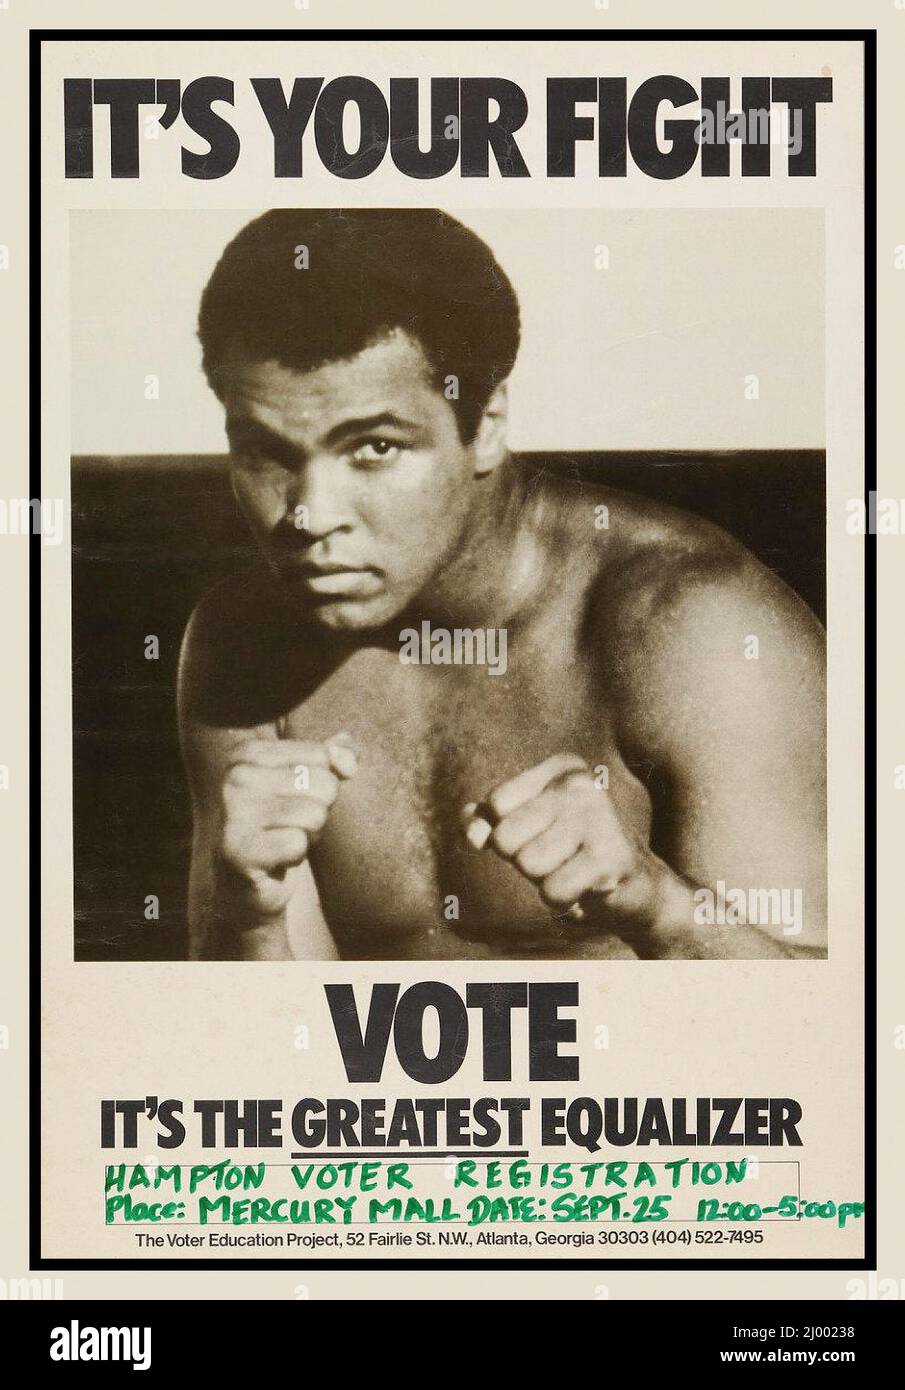 Vintage Equal Rights USA Poster Es ist dein Kampf, abstimmen! IT's the Greatest Equalizer“, Voting Rights Poster mit Muhammad Ali, USA, (1962) Stockfoto